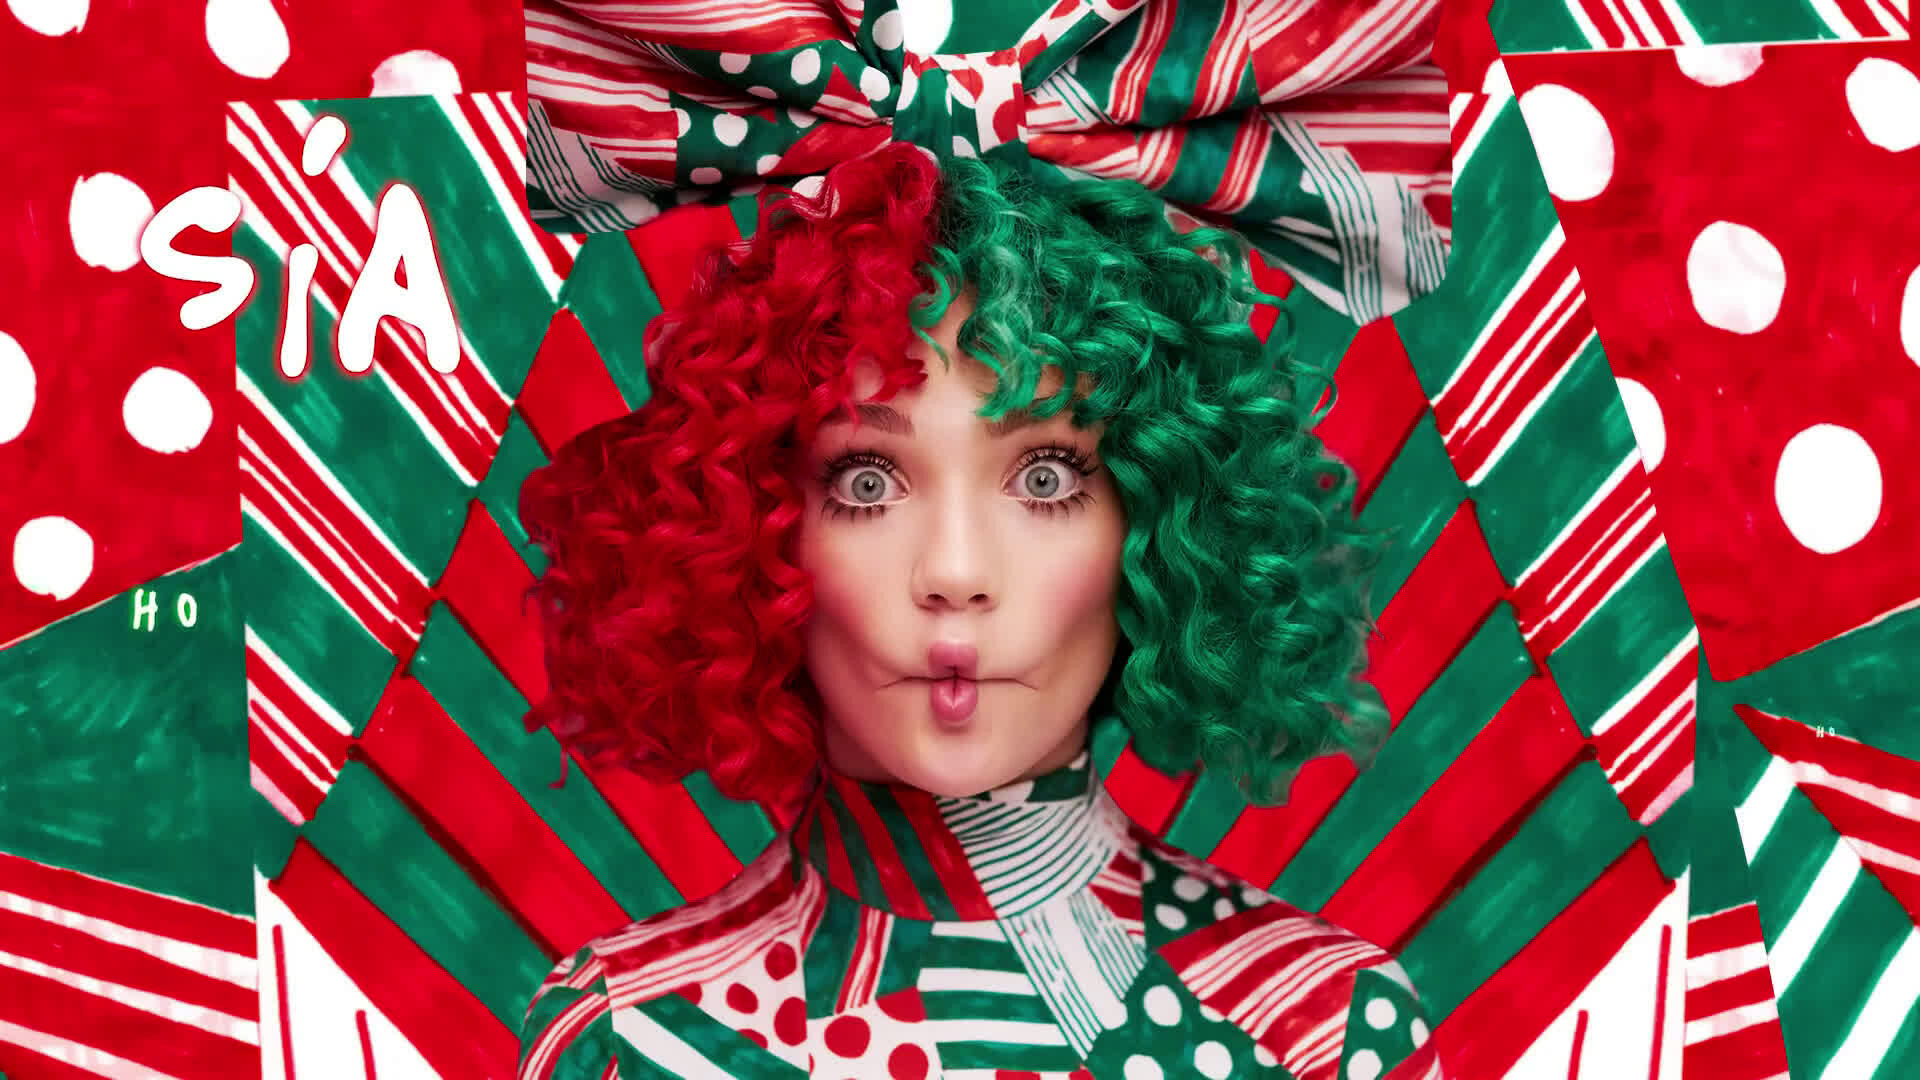 Sia: "Ho Ho Ho", 1000 Forms of Fear, debuted at No. 1 in the U.S. Billboard 200. 1920x1080 Full HD Background.